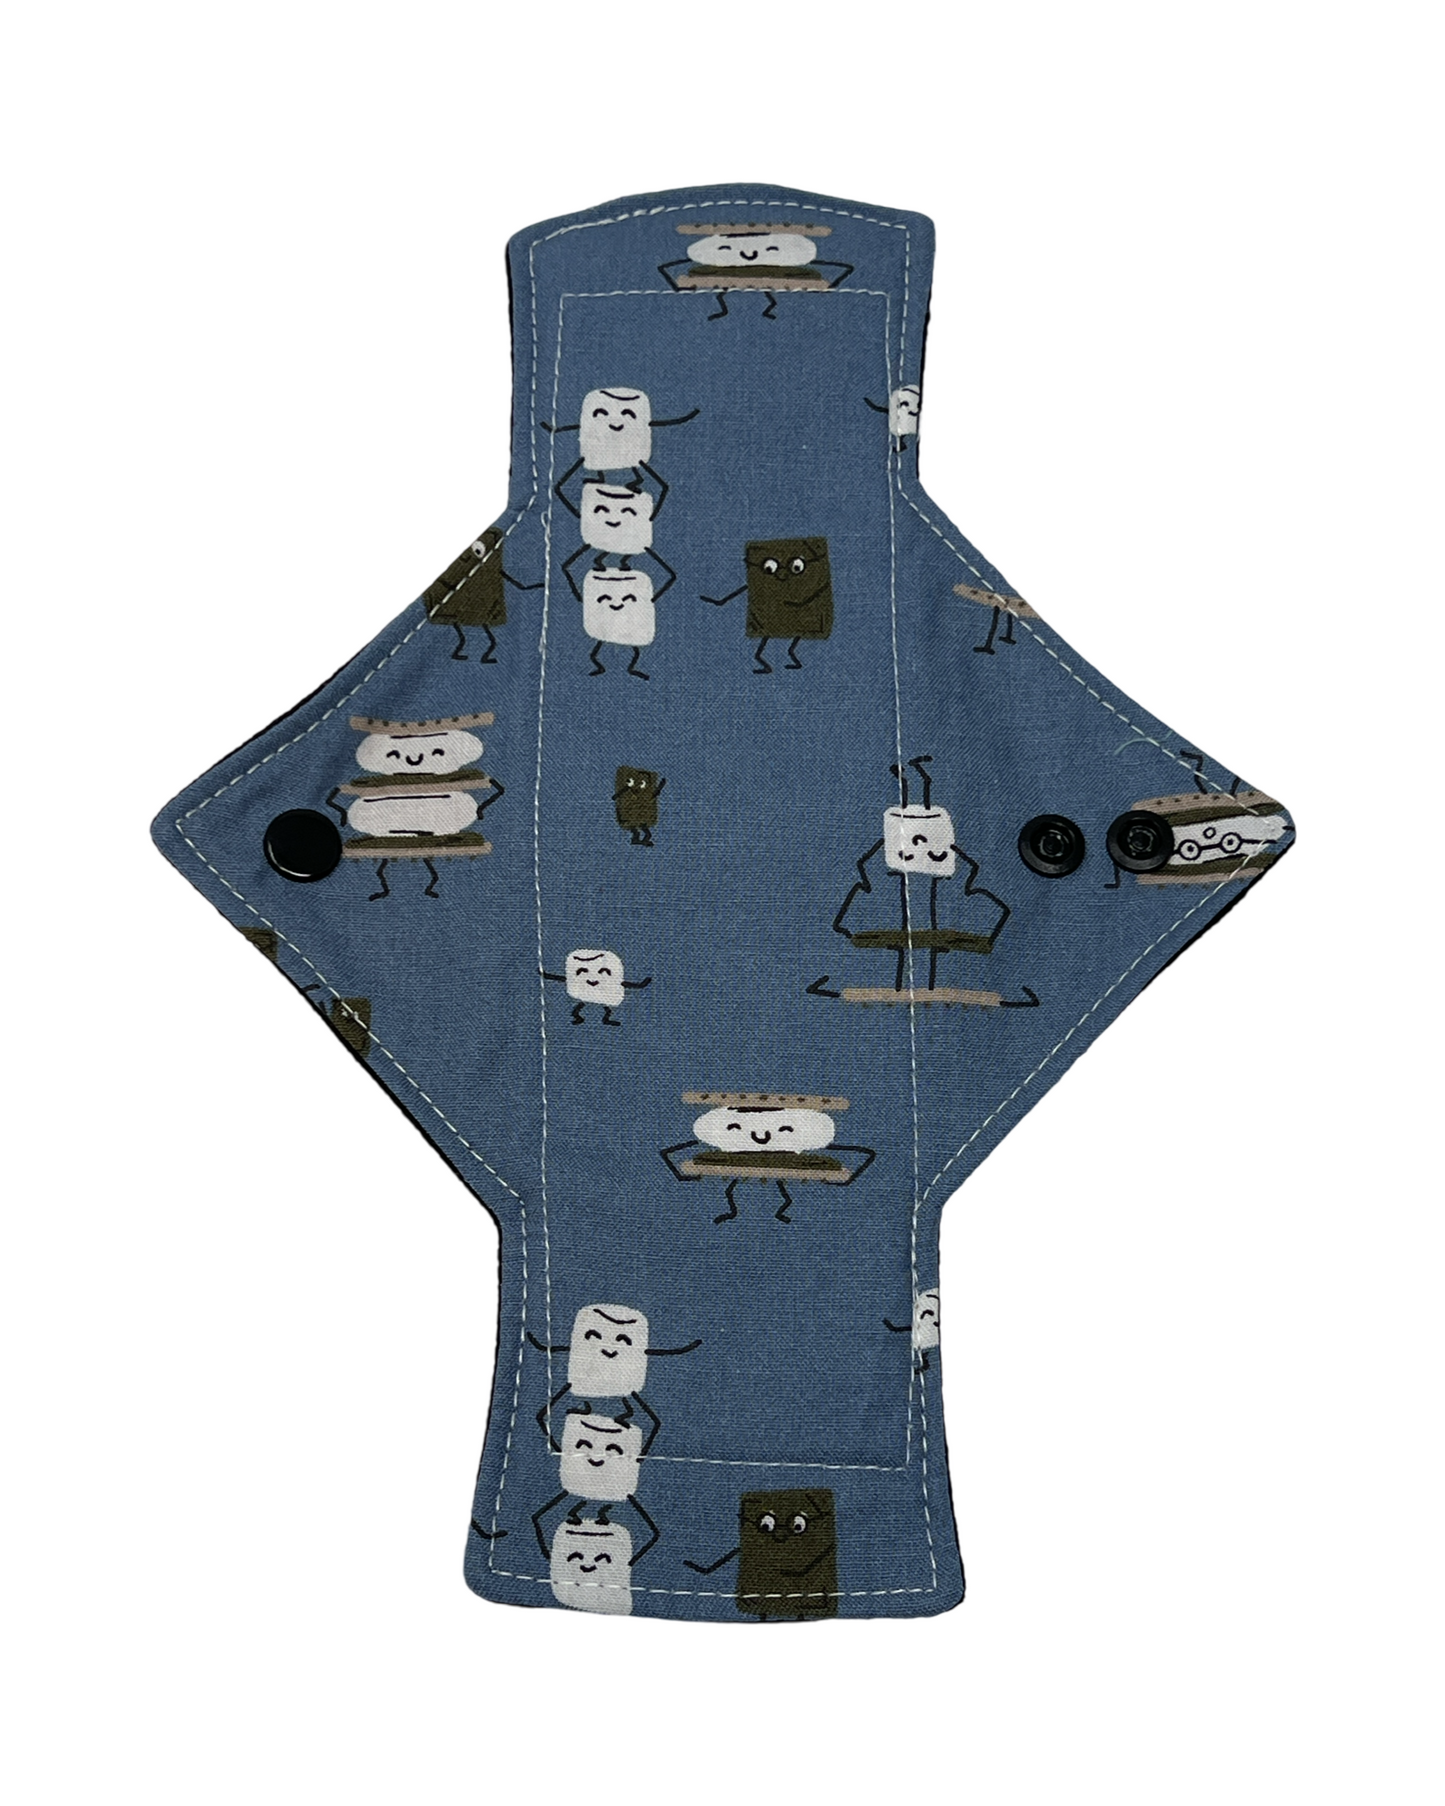 Stash Dash Event 2023 - Backed with Softshell Fleece Smores Limited Edition Cotton Single Light Flow Day Pad - Tree Hugger Cloth Pads